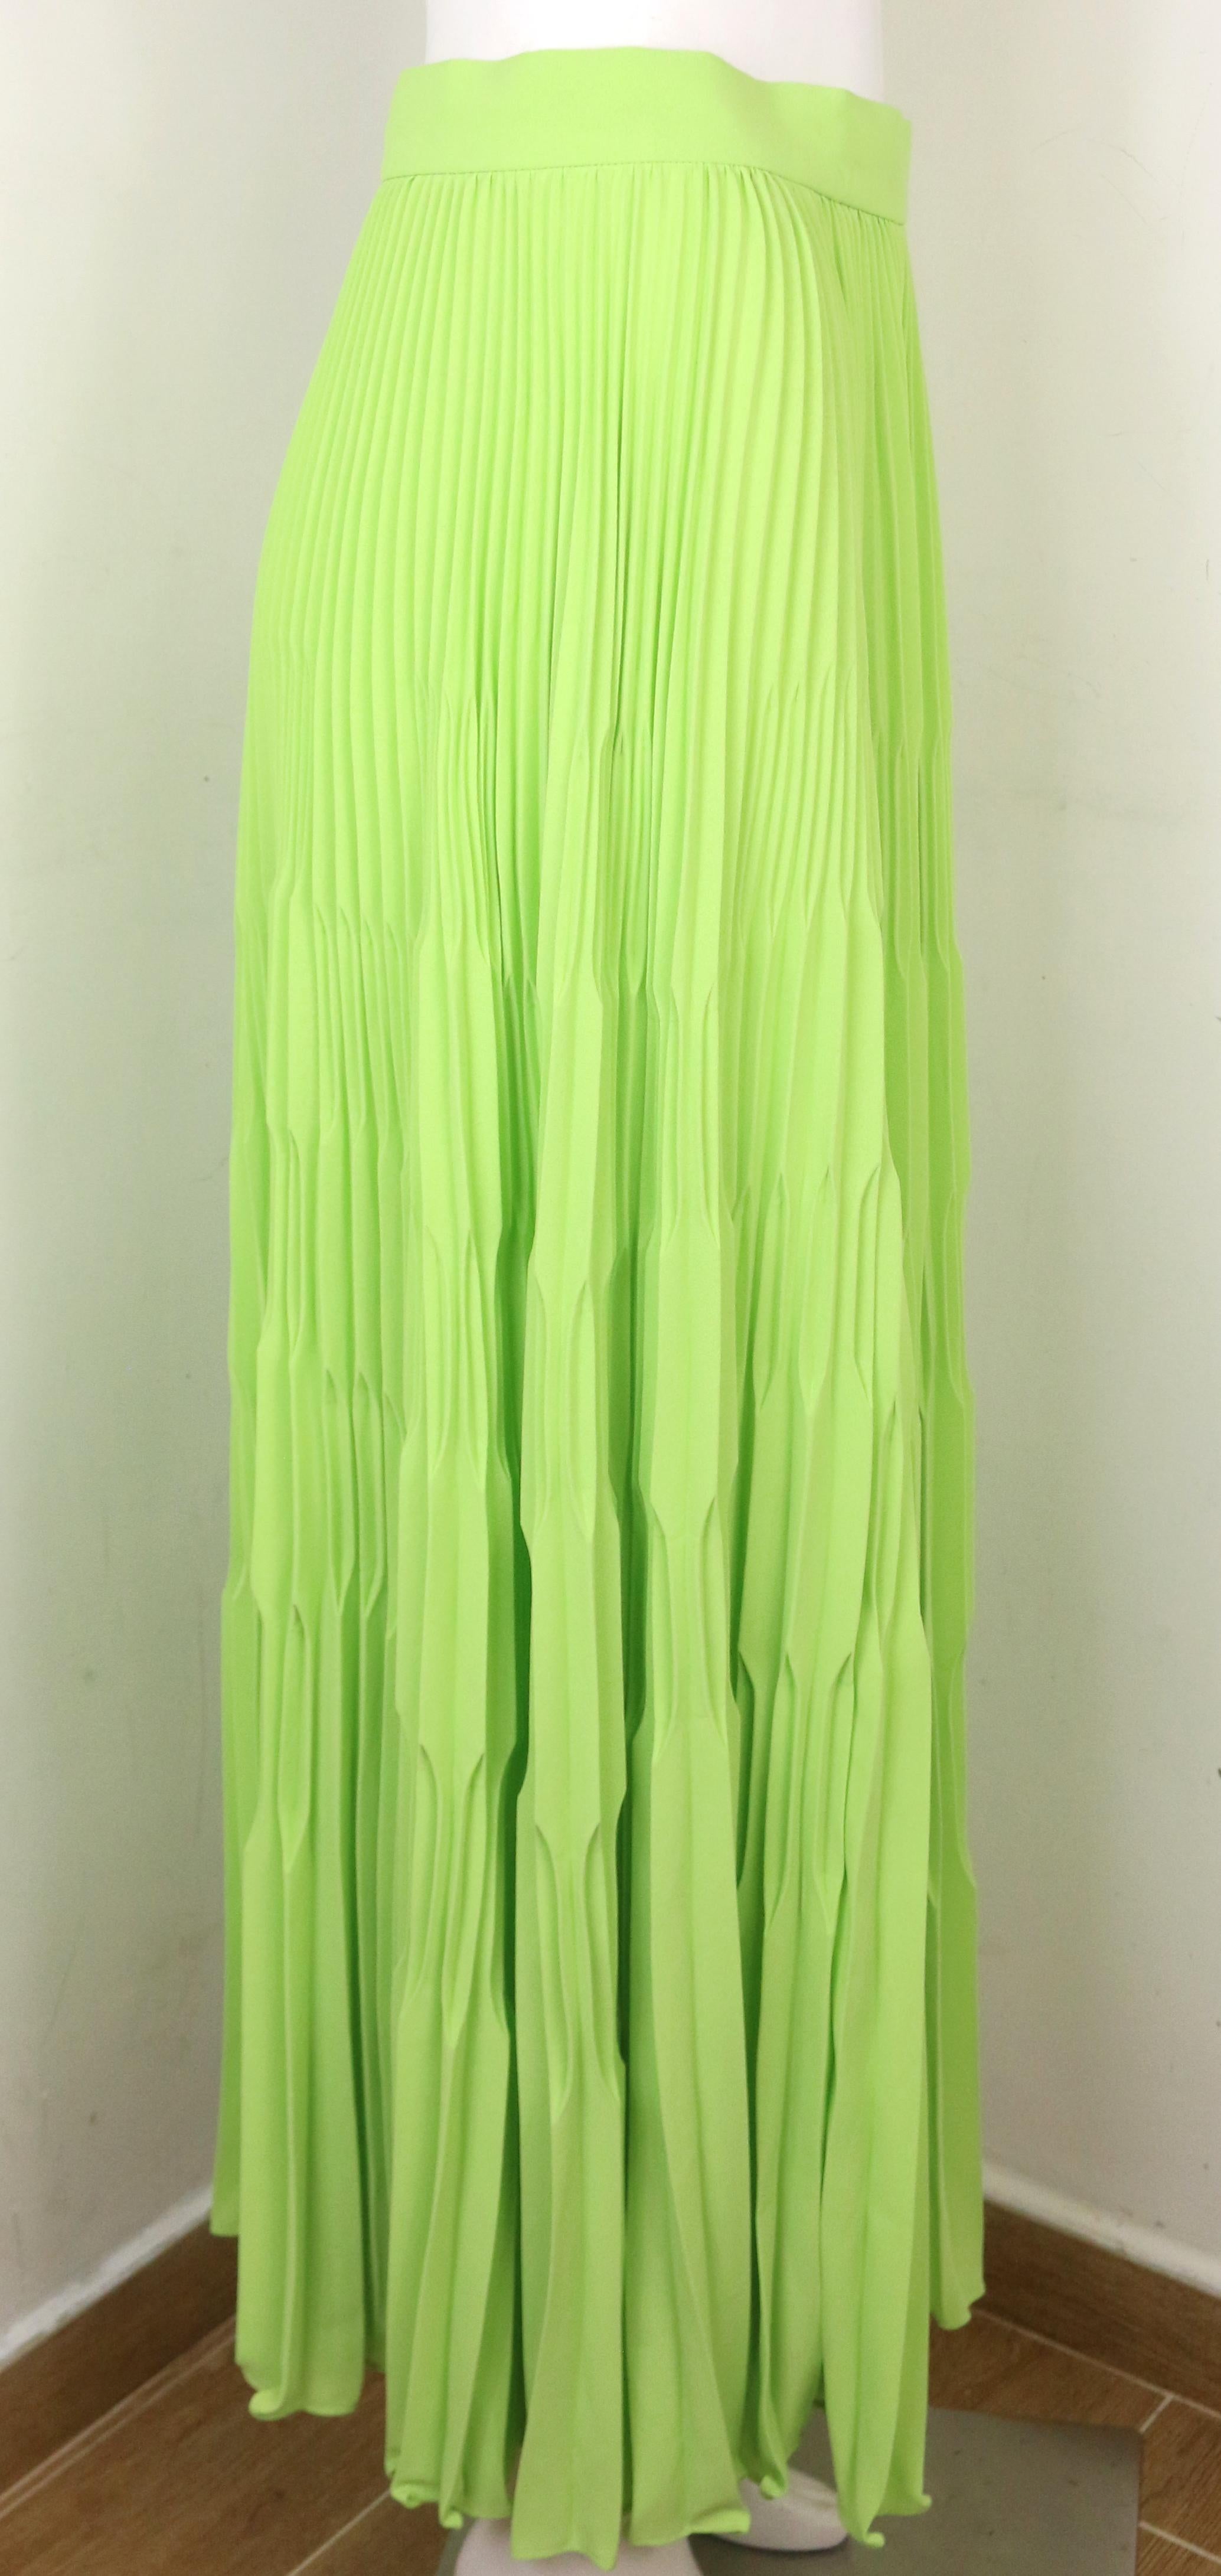 - Vintage 80s Escada green polyester pleated long skirt. Its a really bright and nice color. Pair it with a white t-shirt or top for a hot summer vacation. 

- Featuring side zip and button closure. 

- Size 36. 

- 100% Polyester. 

- Unworn with